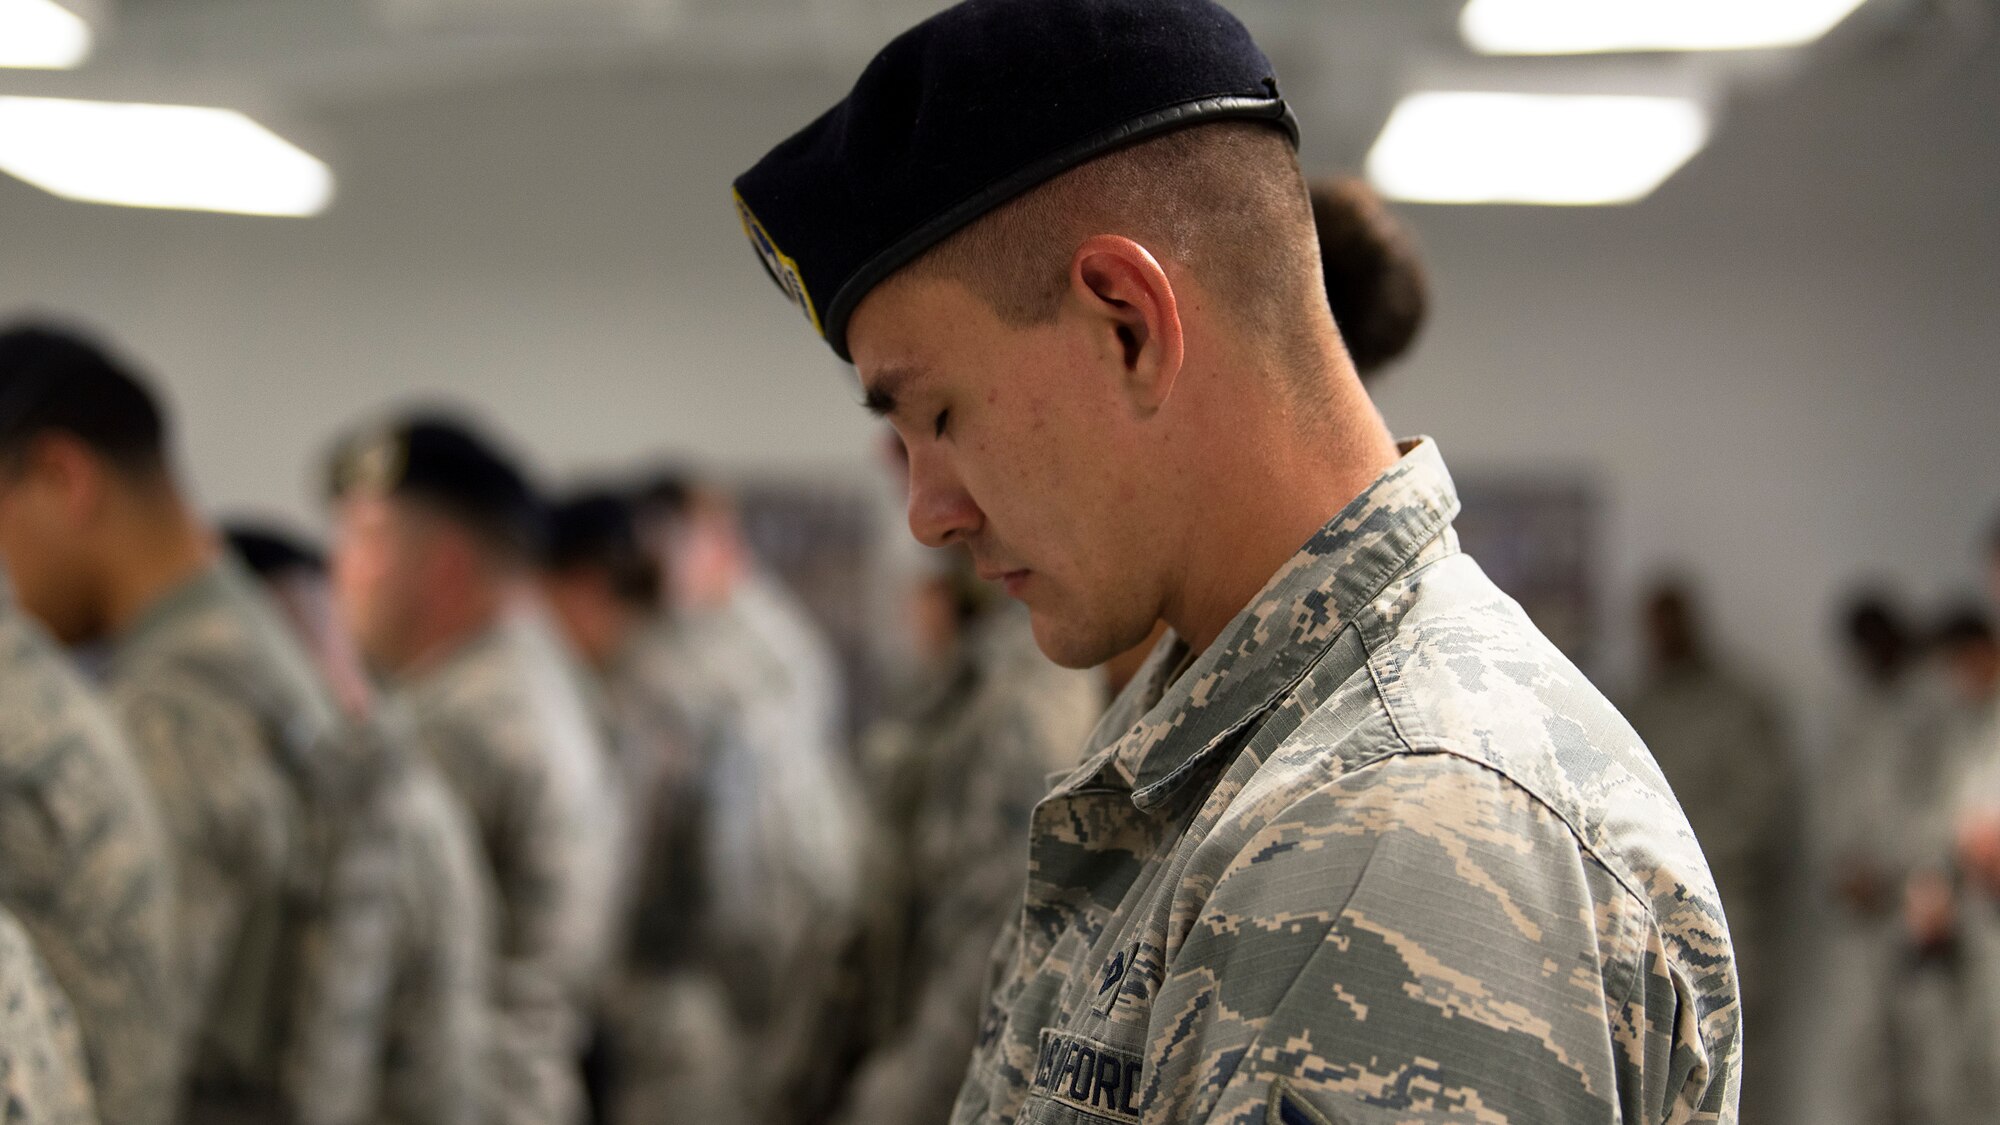 An Airmen of the 6th Security Forces Squadron bows his head during a moment of silence in remembrance of fallen law enforcement officers at MacDill Air Force Base, Fla., May 21, 2018. The ceremony was held as part of Police Week, which included other events such as a 24-hour vigilance run and a kickball game.